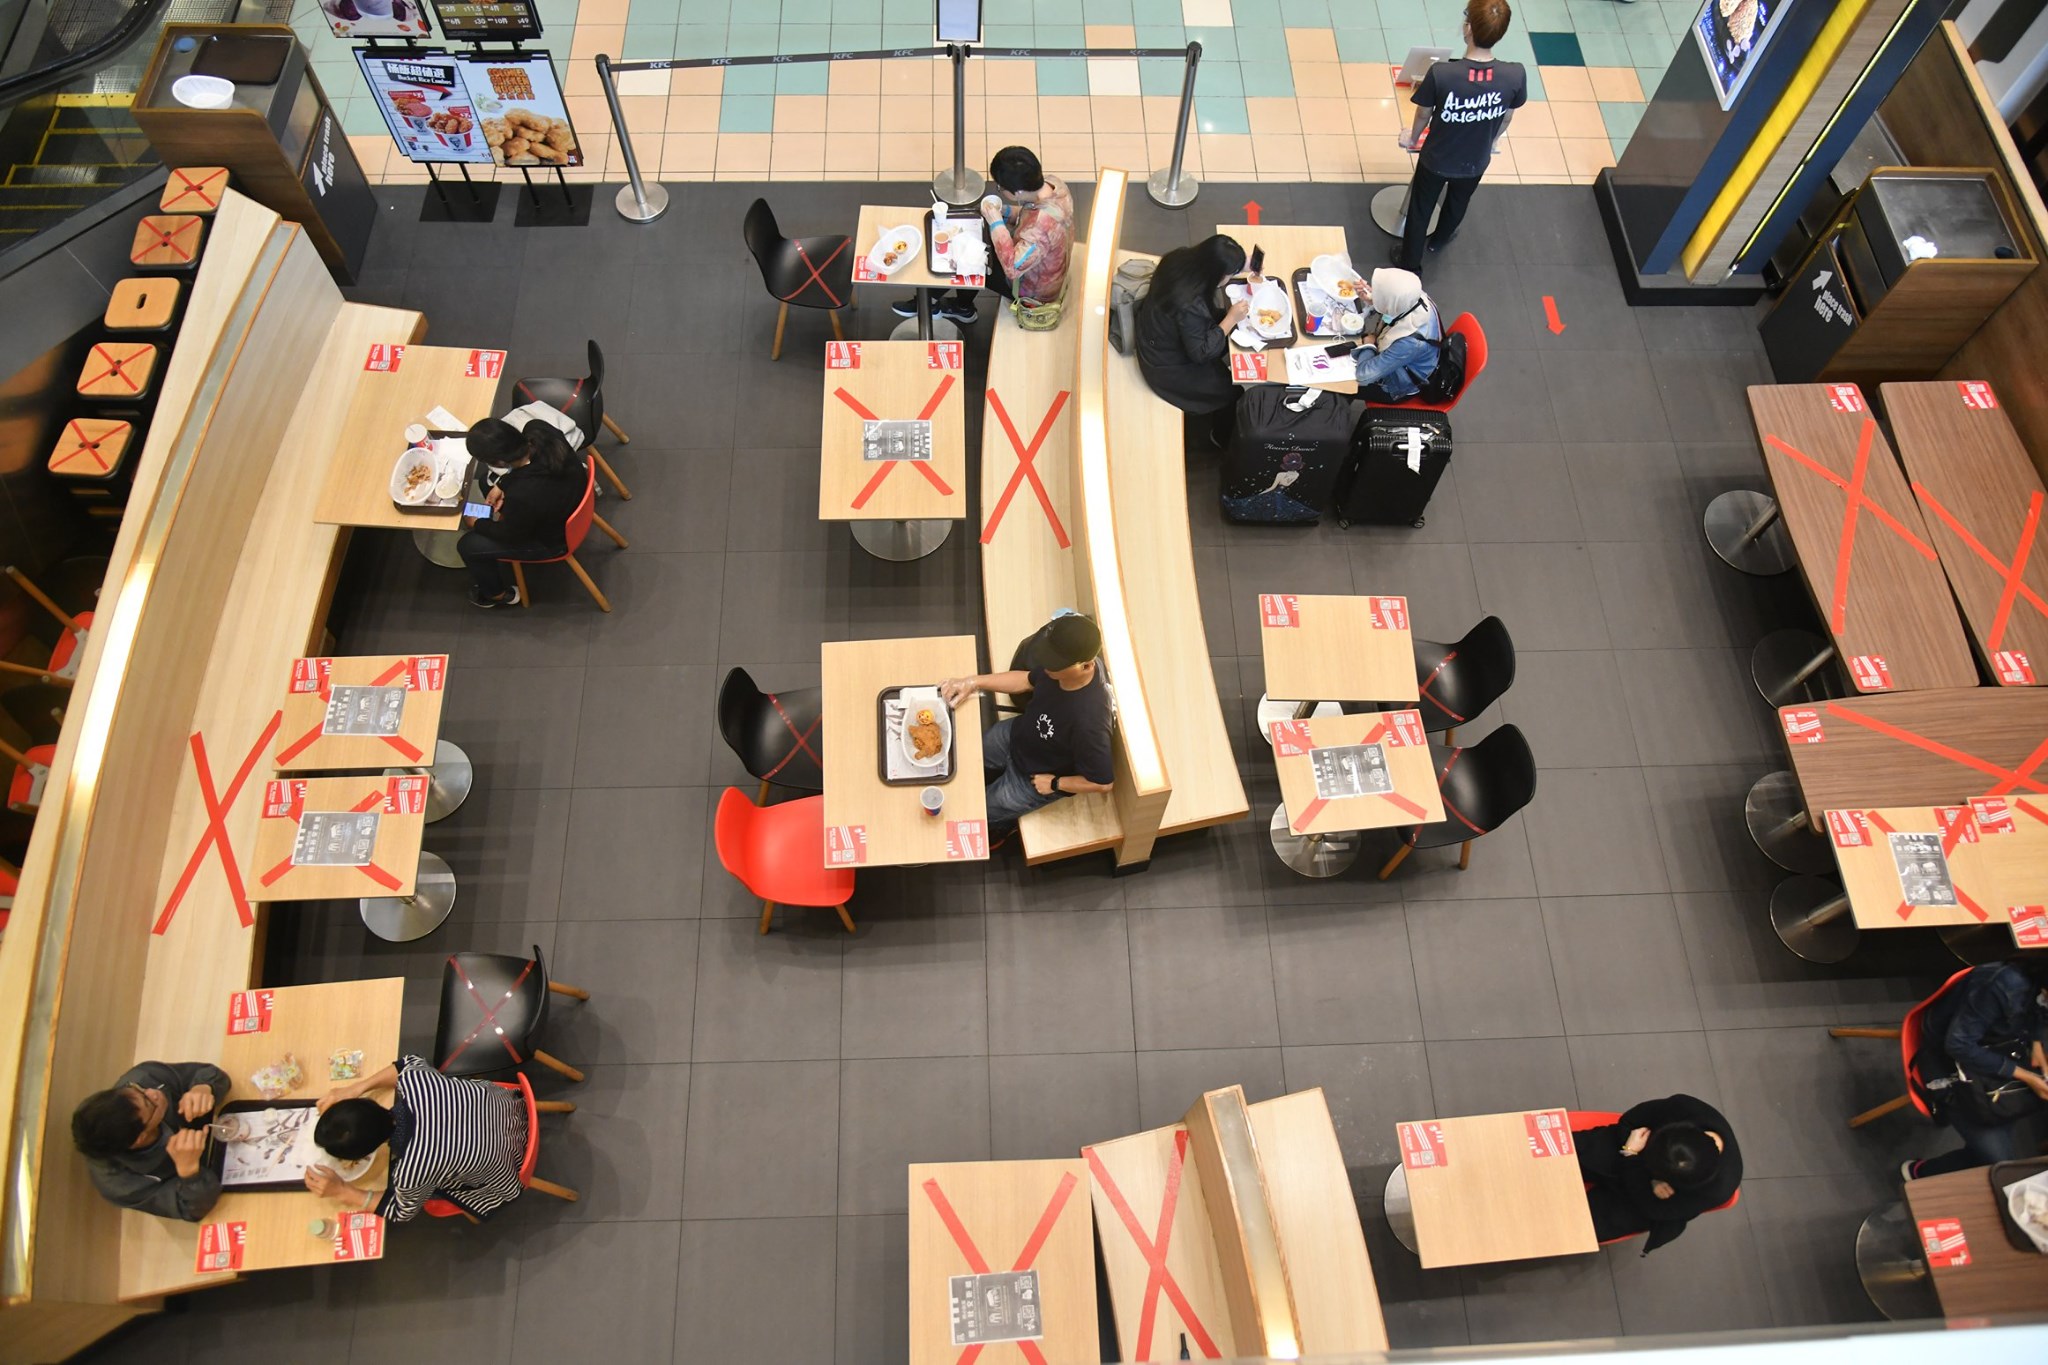 A restaurant complying by government restrictions on spacing and seating capacity. Photo: Hong Kong Government